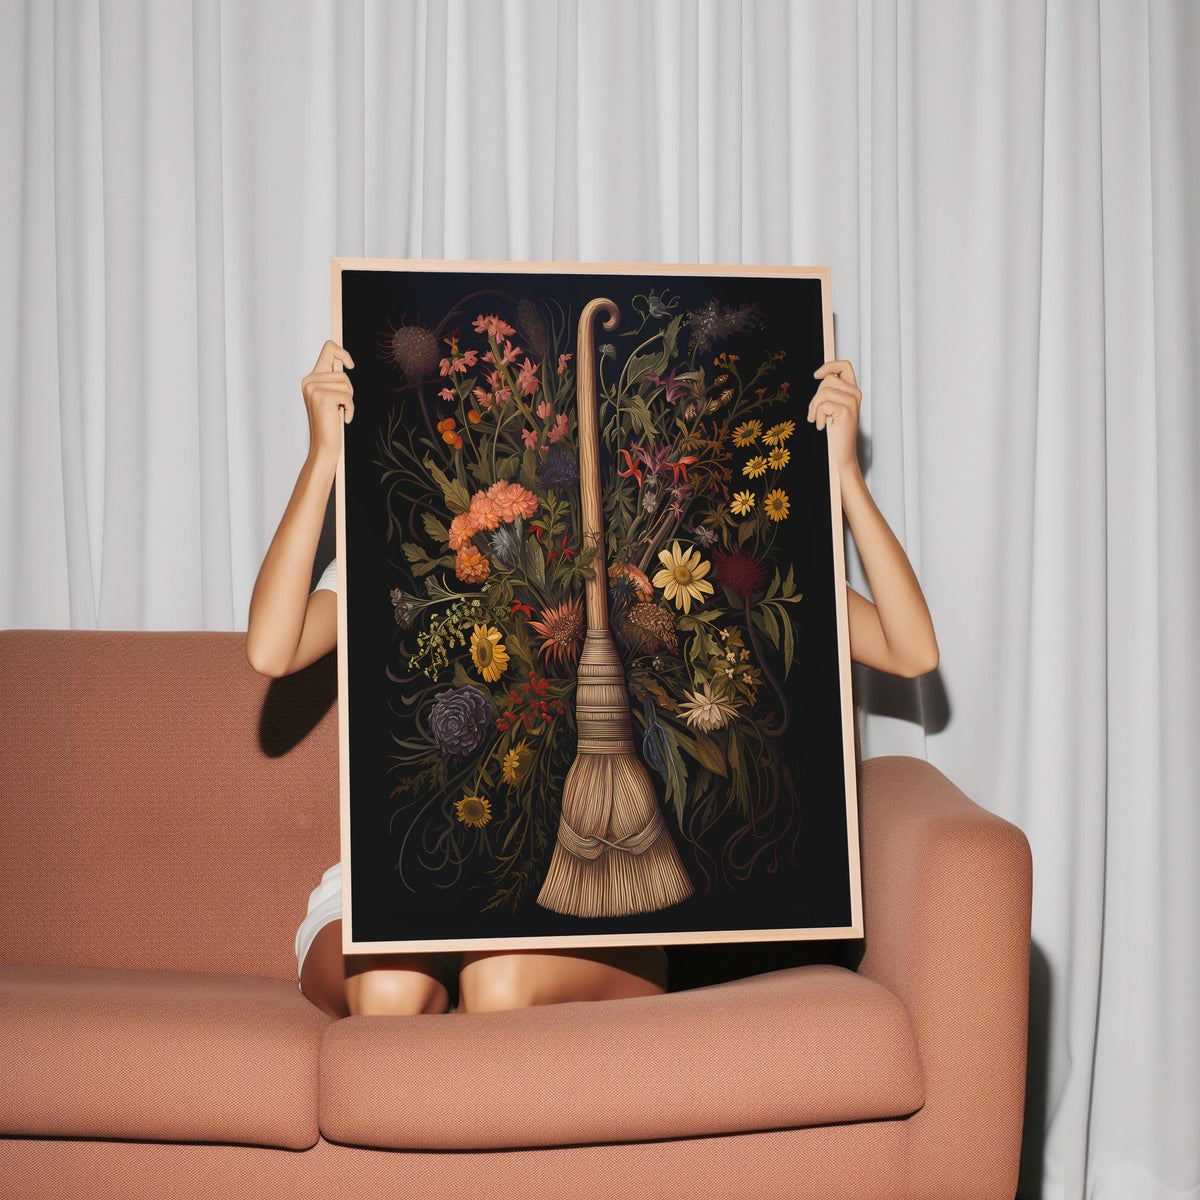 a woman holding up a picture of a vase with flowers